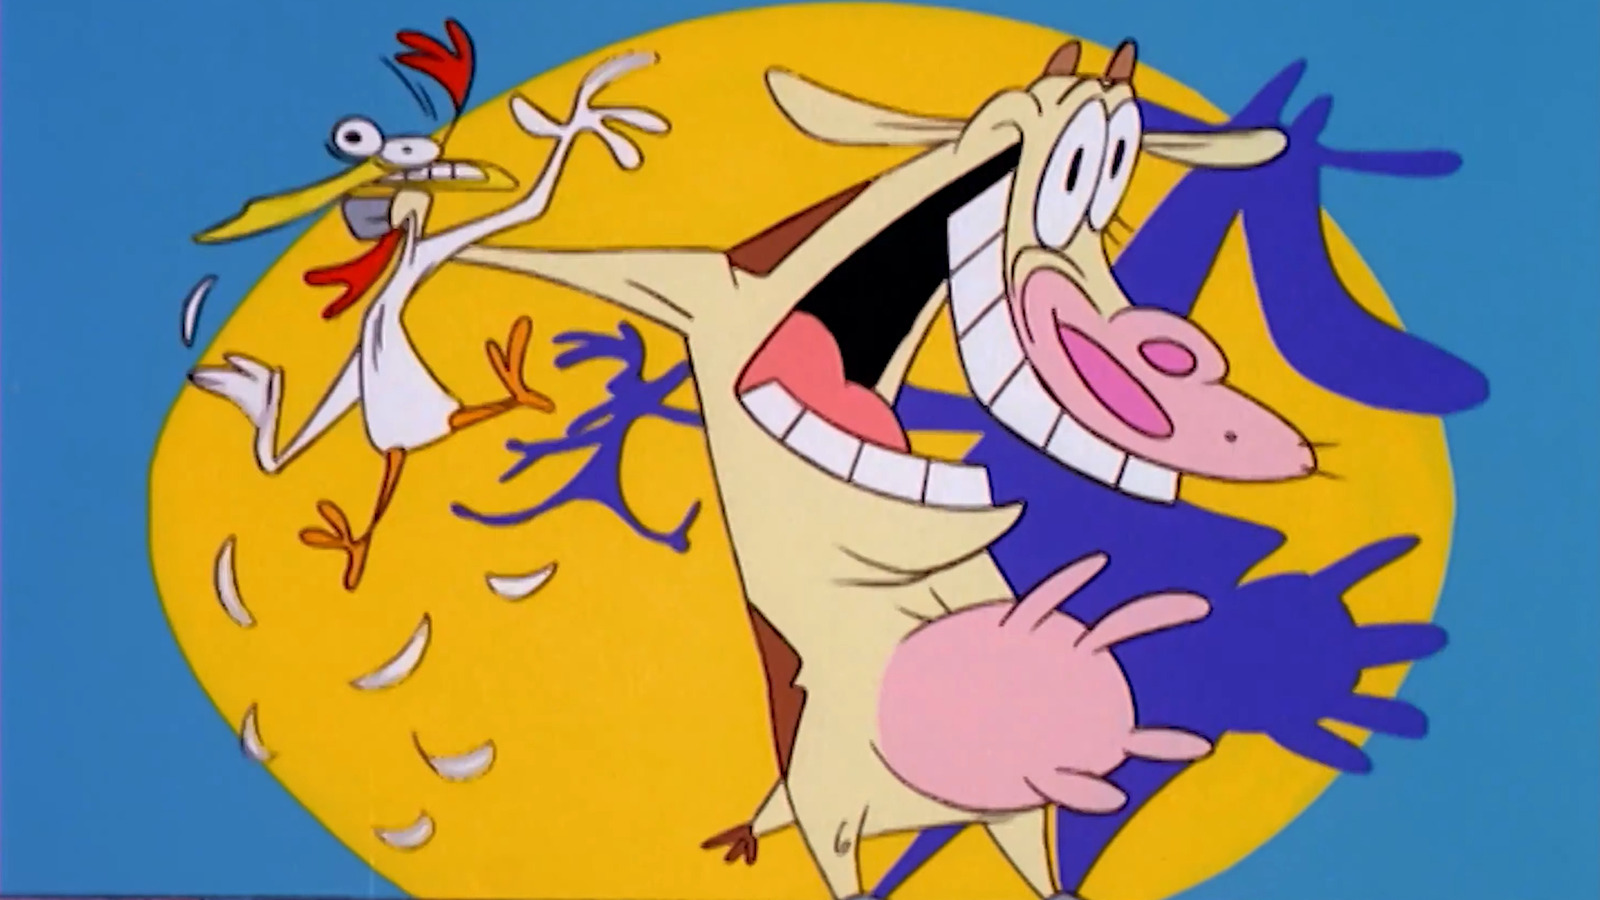 Cow And Chicken Creator David Feiss Explains His Original Idea For The Show  And Network Notes About The Devil [Interview]